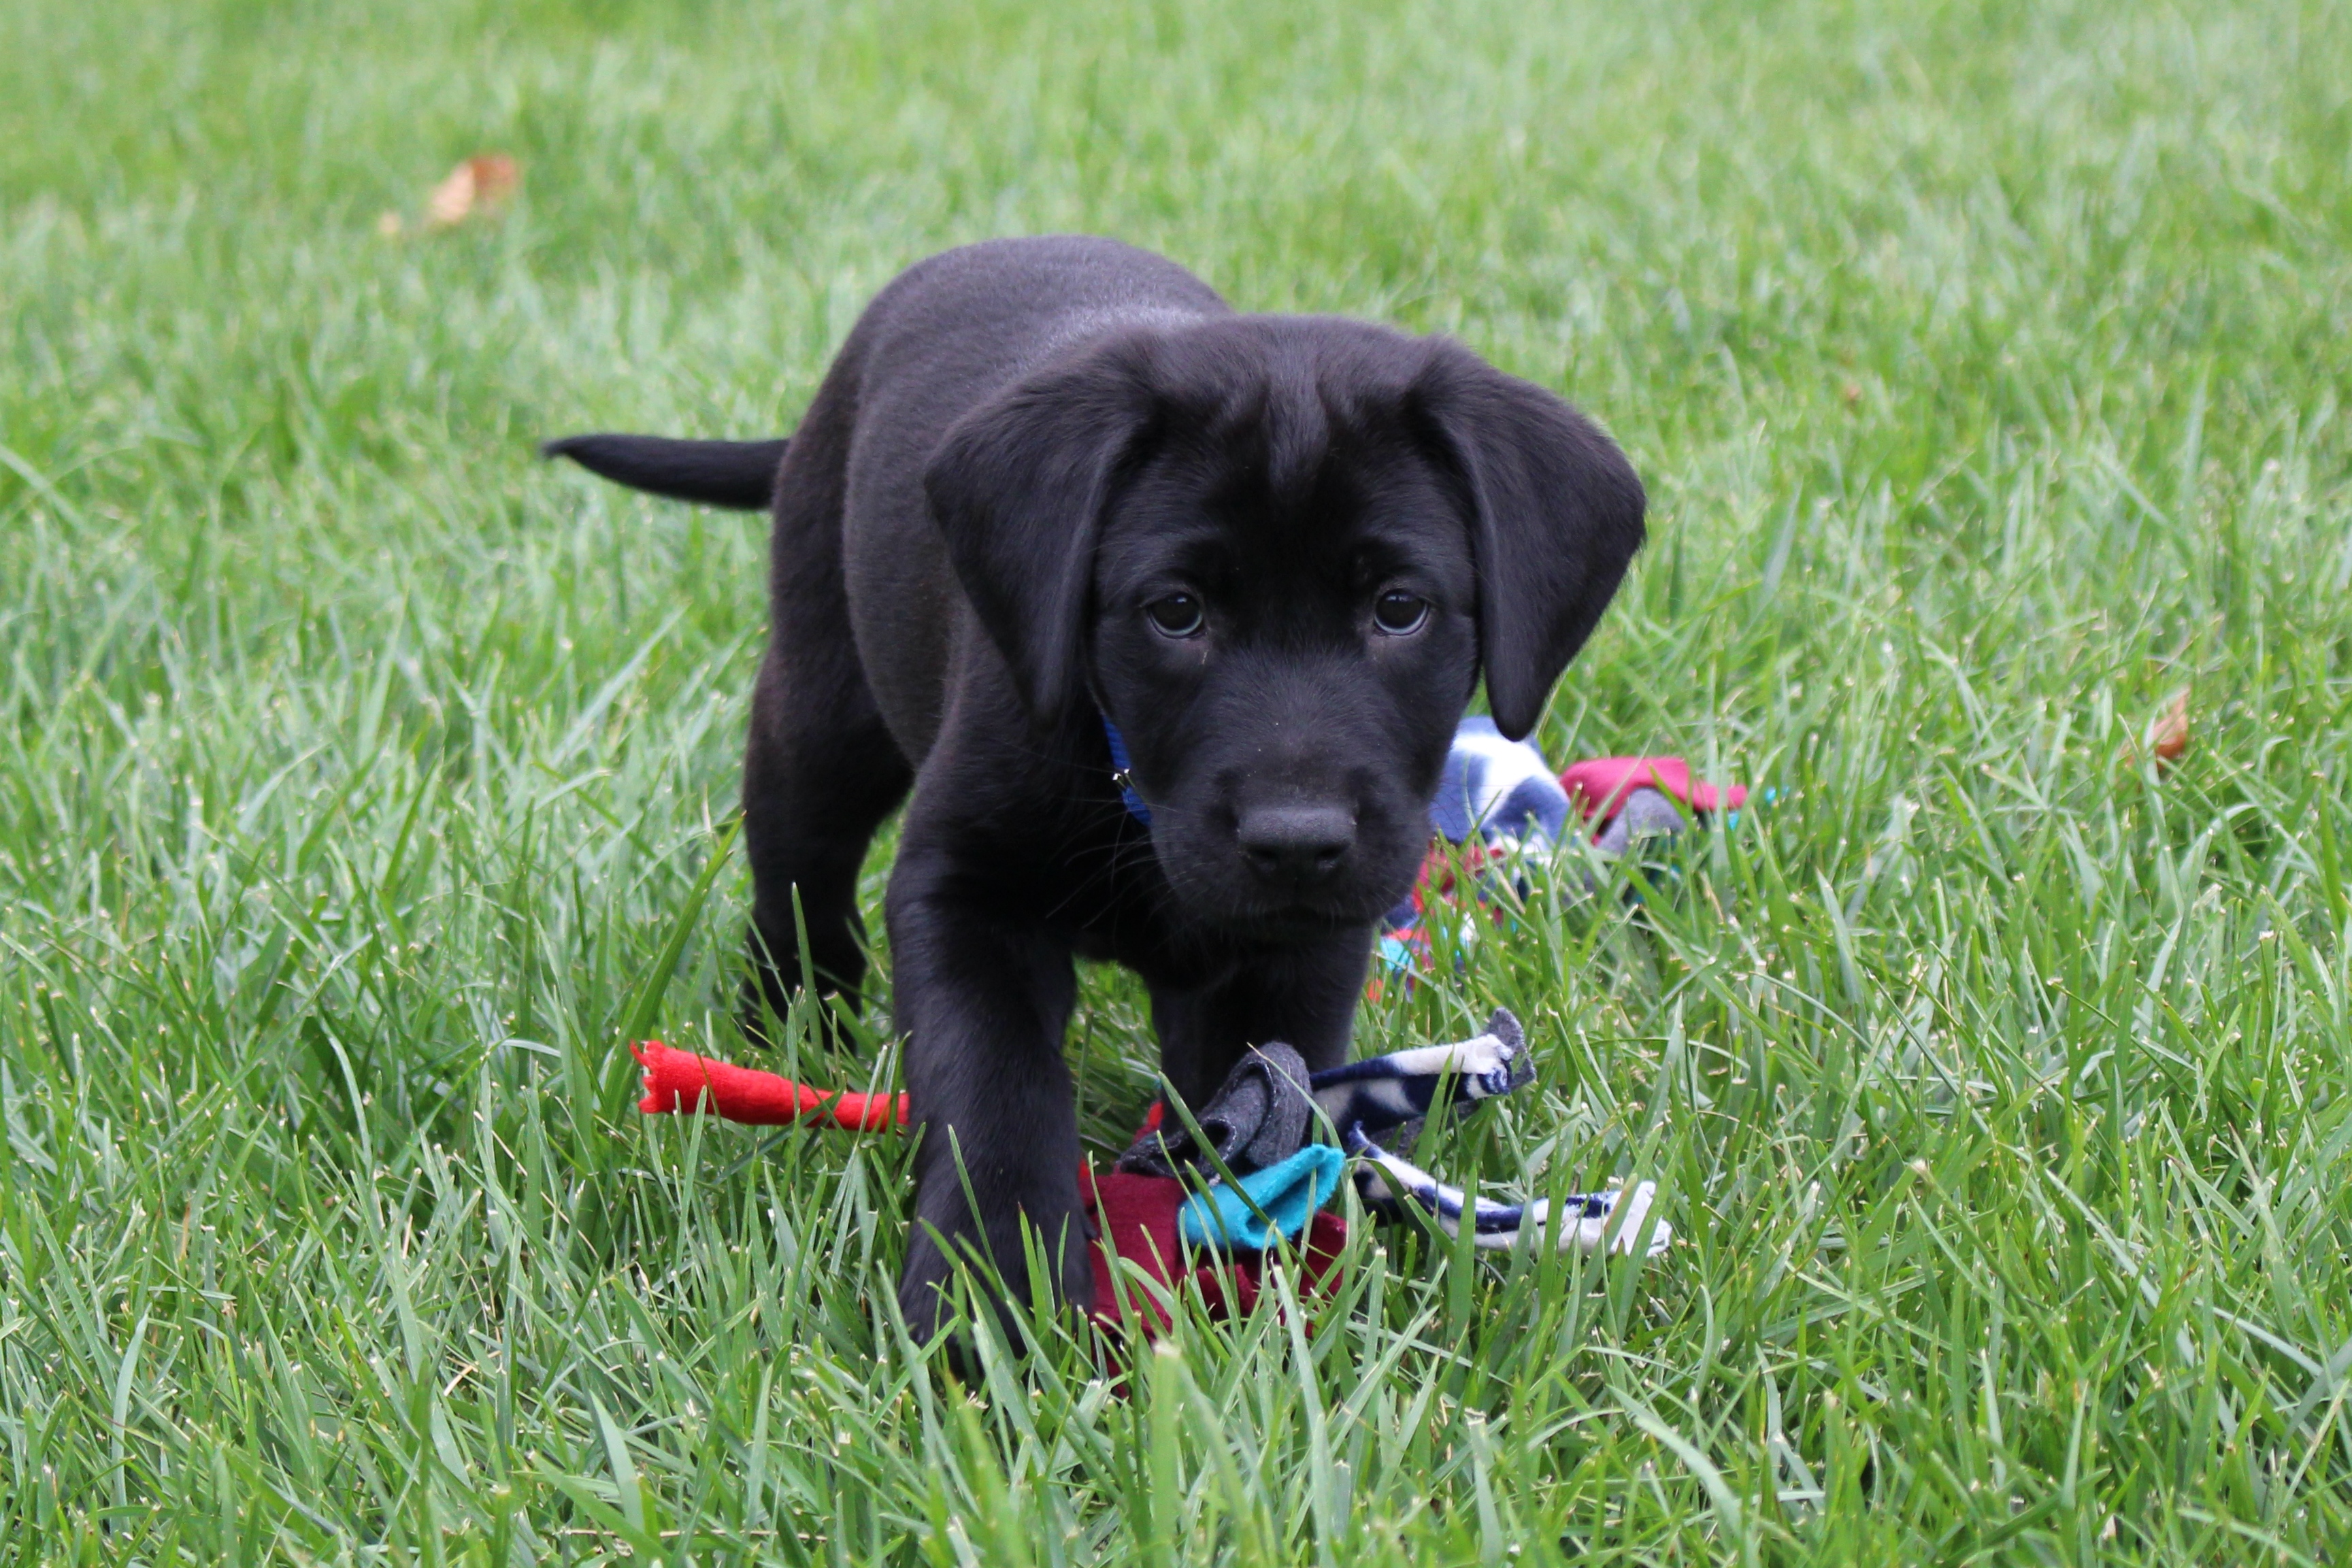 Puppy with toy standing in grass. 